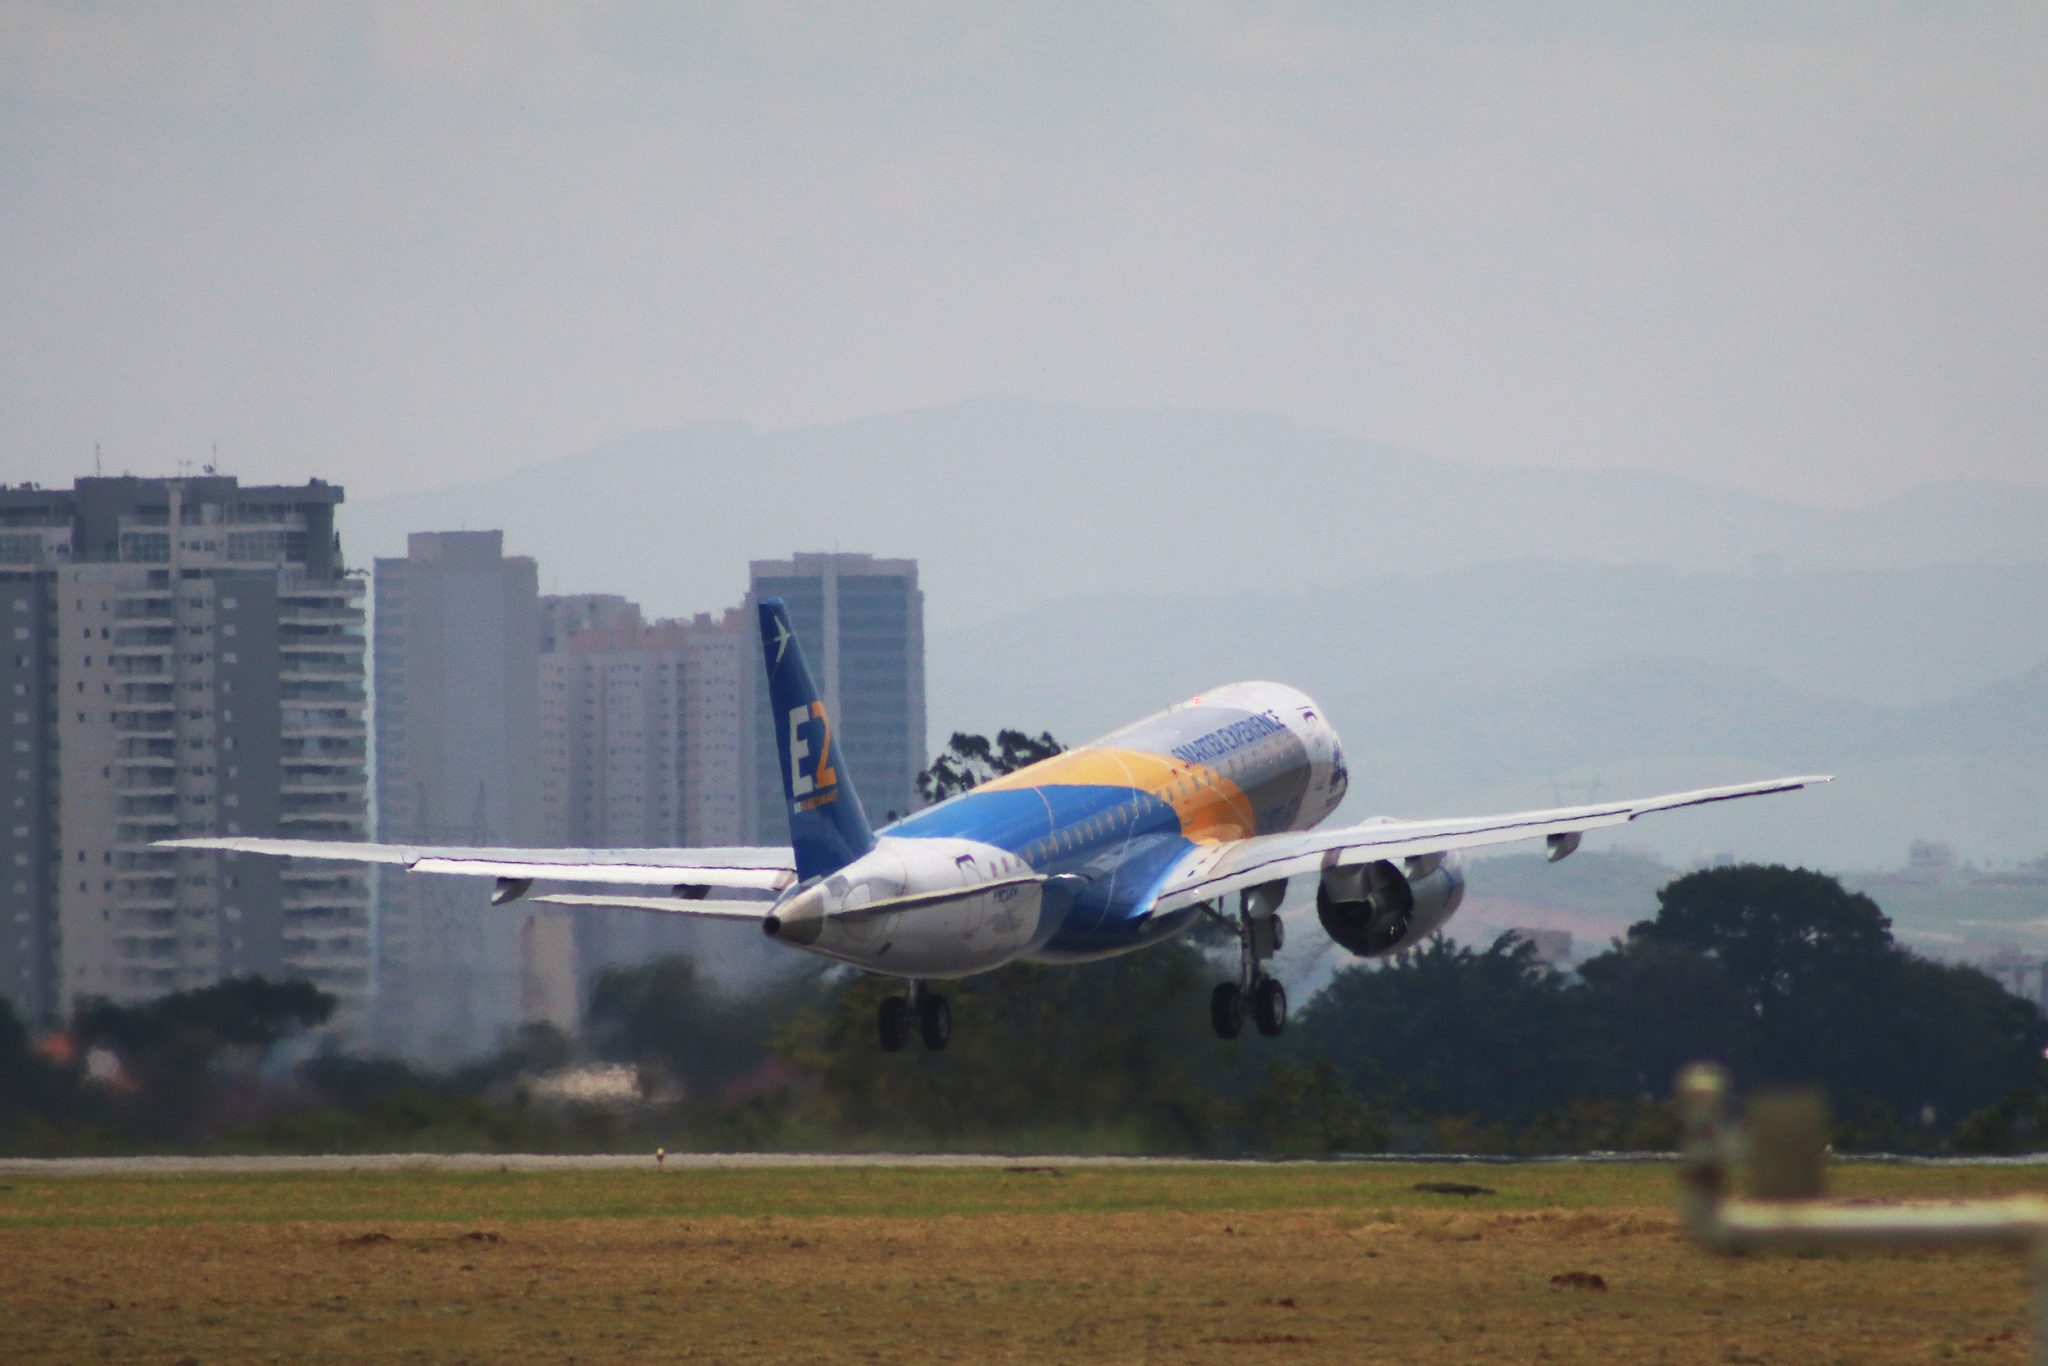 Embraer E190-E2 Granted Certification by ANAC, FAA and EASA